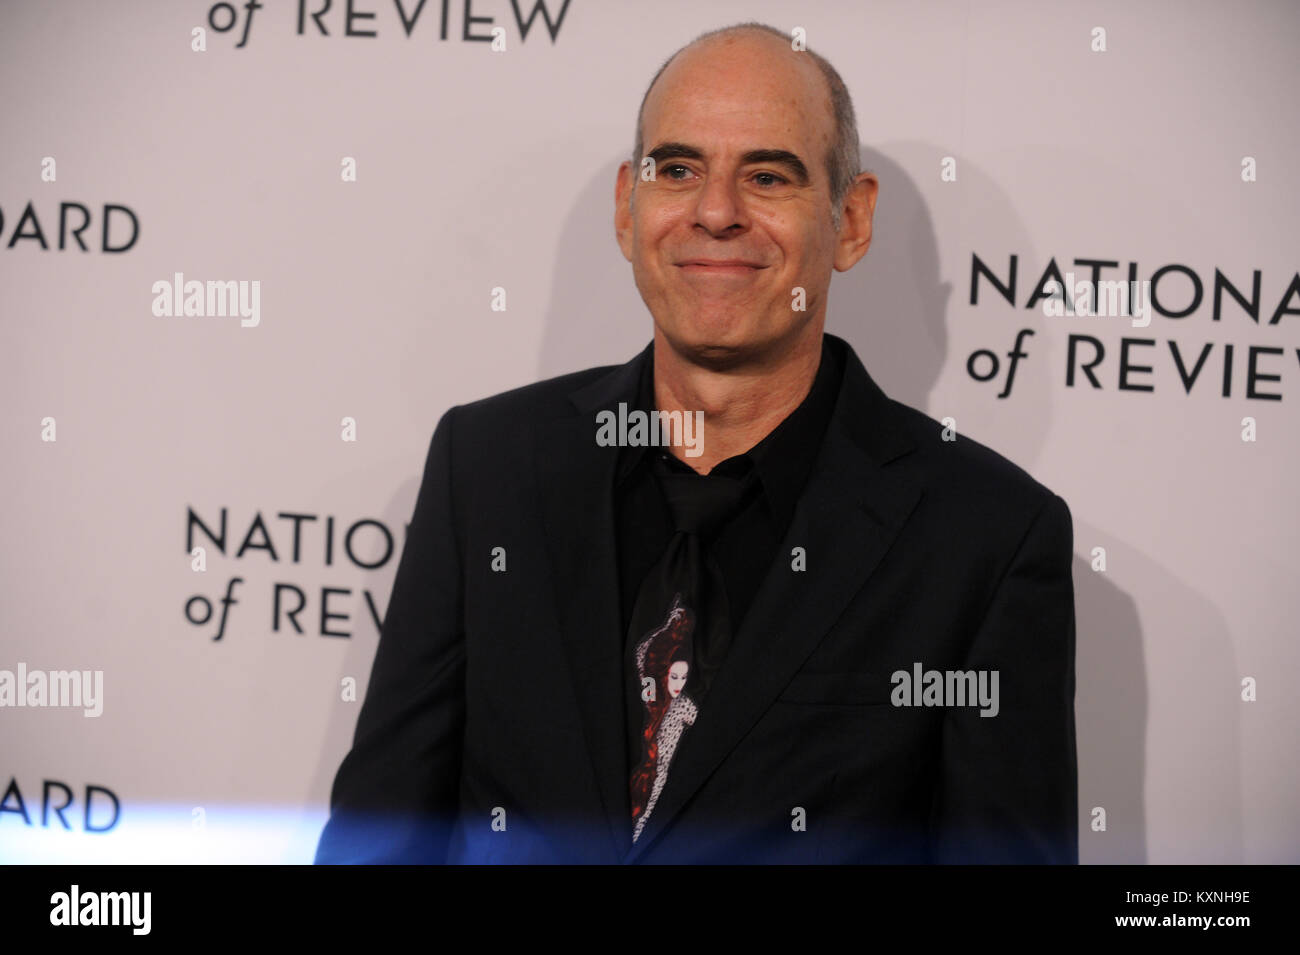 Manhattan, United States Of America. 09th Jan, 2018. Samuel Maoz attends the The National Board Of Review Annual Awards Gala at Cipriani 42nd Street on January 9, 2018 in New York City. People: Samuel Maoz Credit: Storms Media Group/Alamy Live News Stock Photo